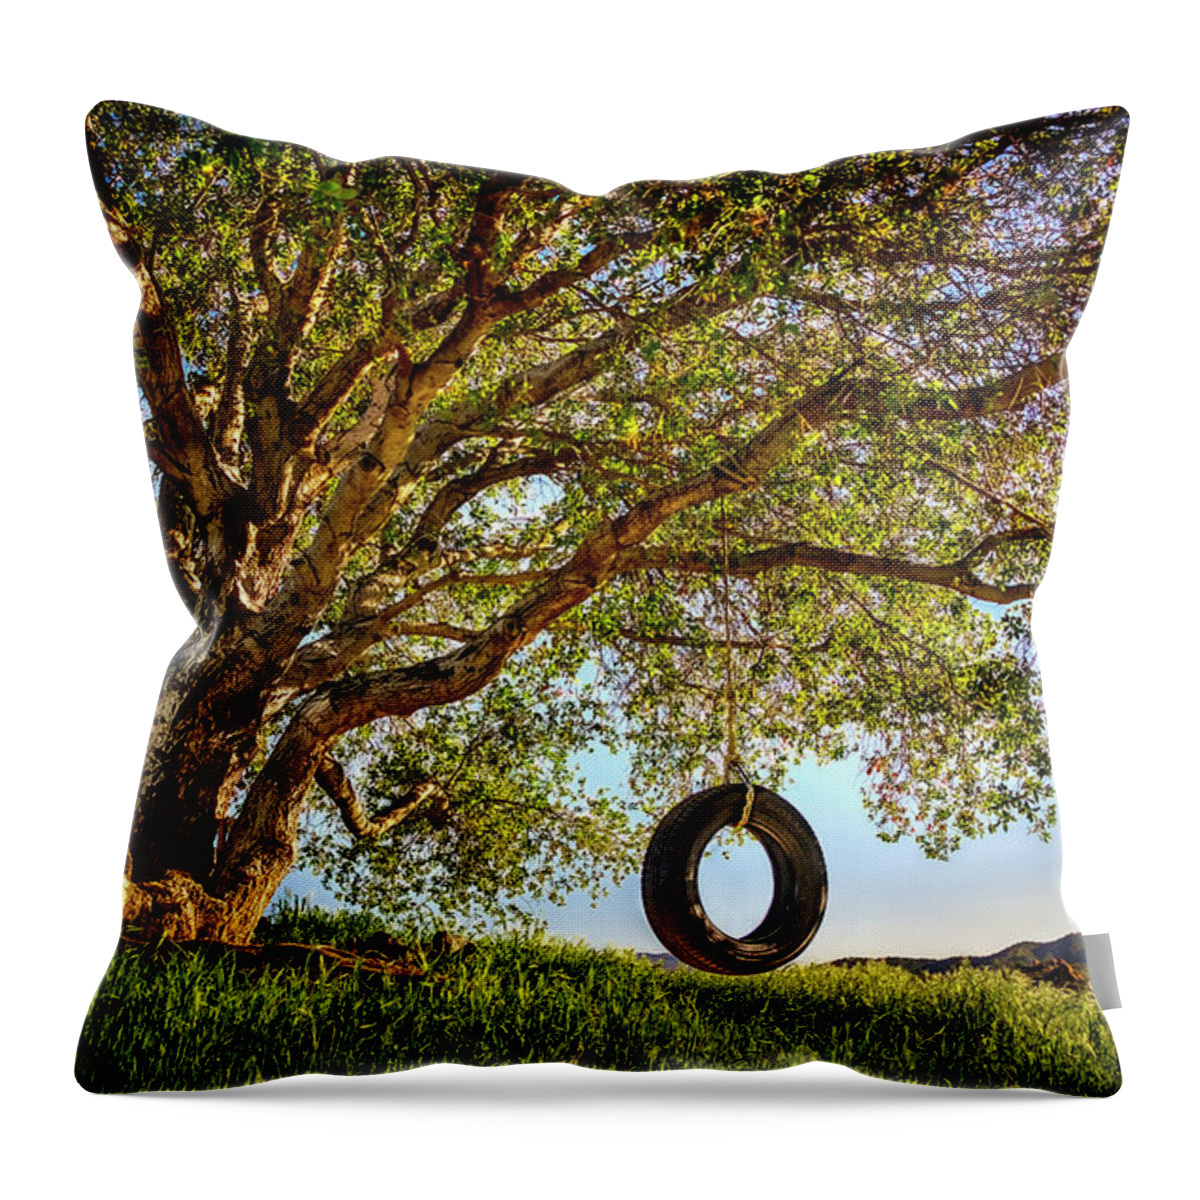 Oak Tree Throw Pillow featuring the photograph The Old Tire Swing by Endre Balogh